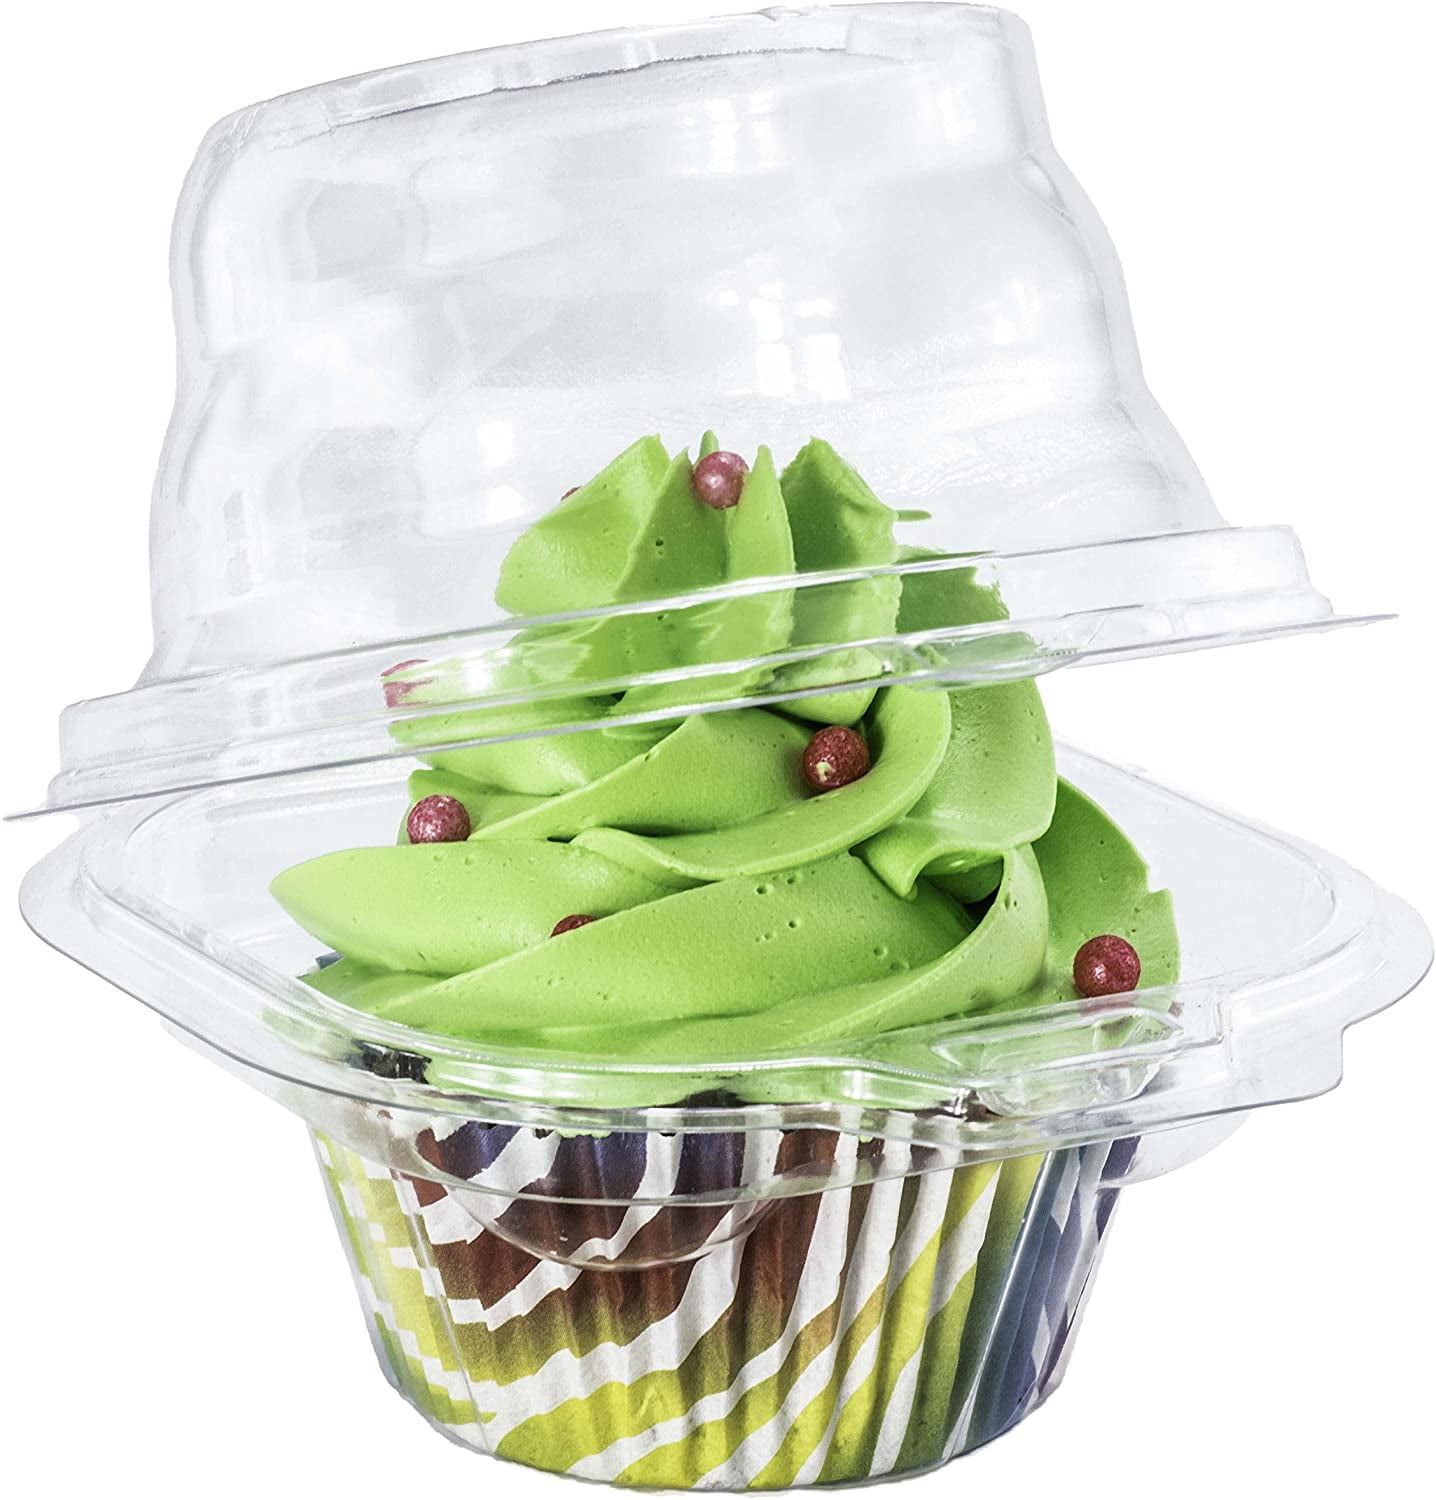 Set of 50 Aftermarket 50 x Plastic Single Individual Cupcake Muffin Dome Holders Cases Boxes Cups Pods 